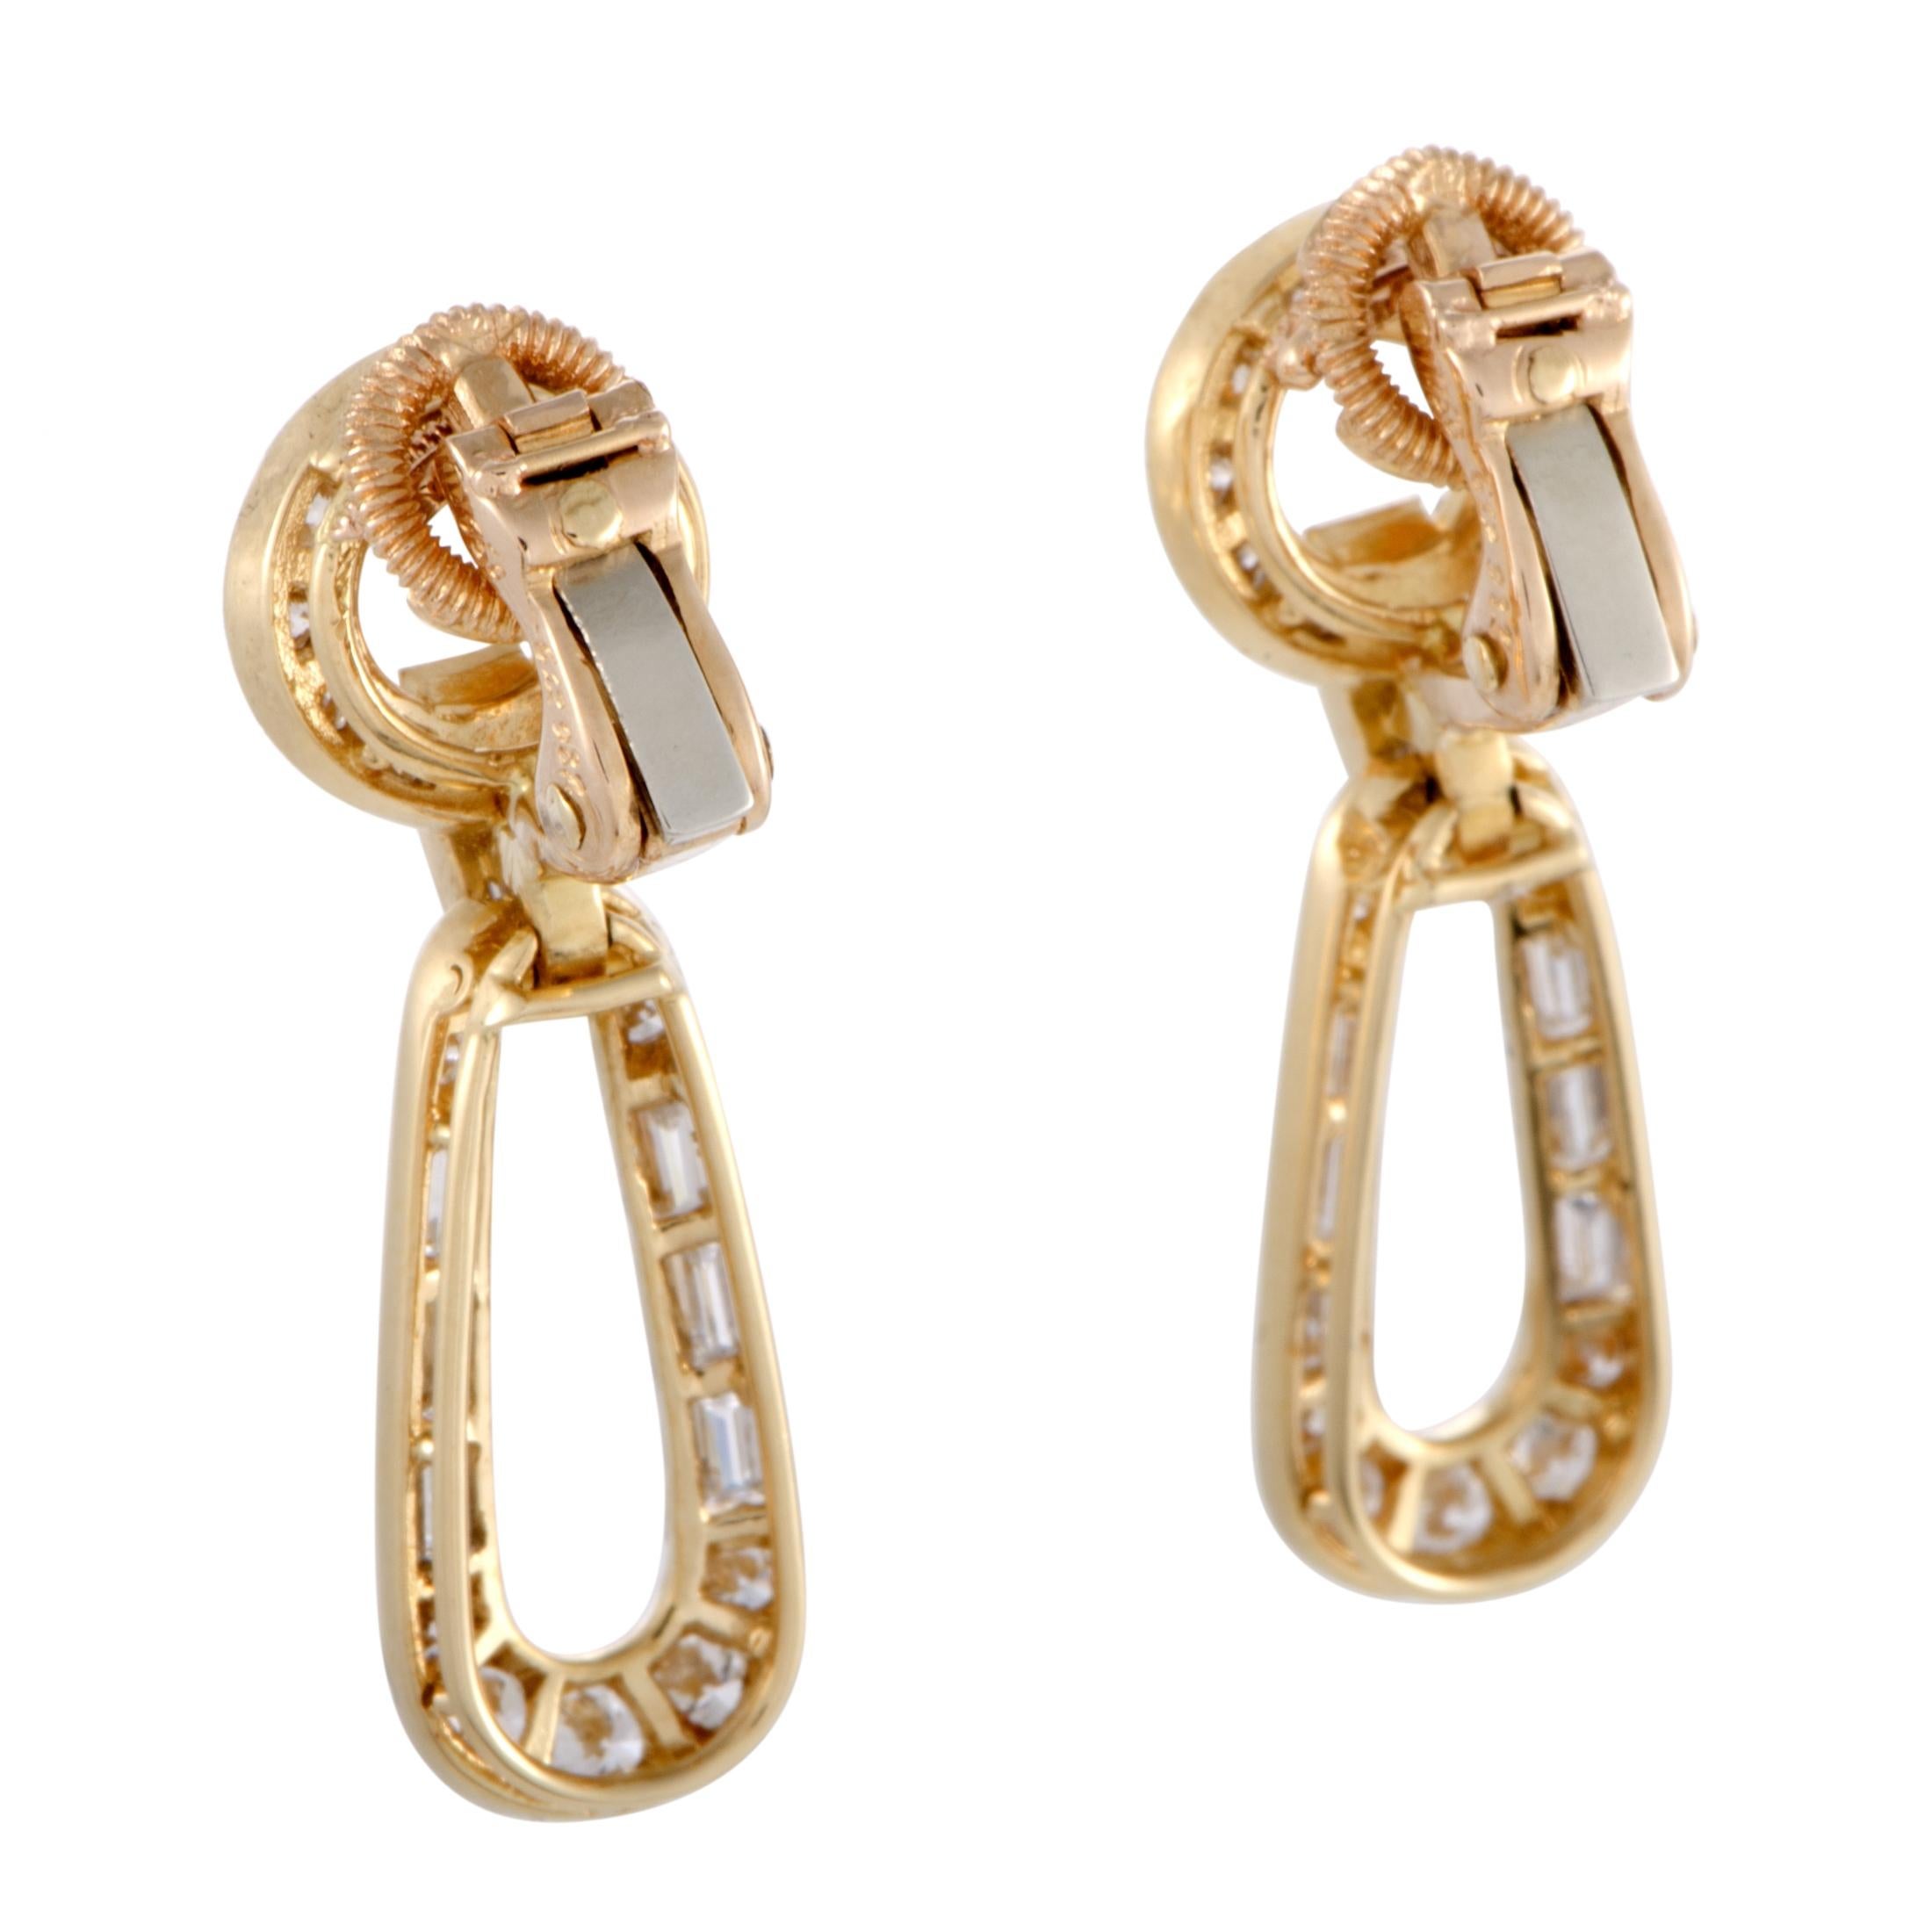 Exuding irresistible excellence and exuberant prestige to perfectly fit the brand’s timeless style of classic refinement and unrivaled quality, these stylishly exuberant earrings from Cartier are a rare vintage design presented in 18K yellow gold